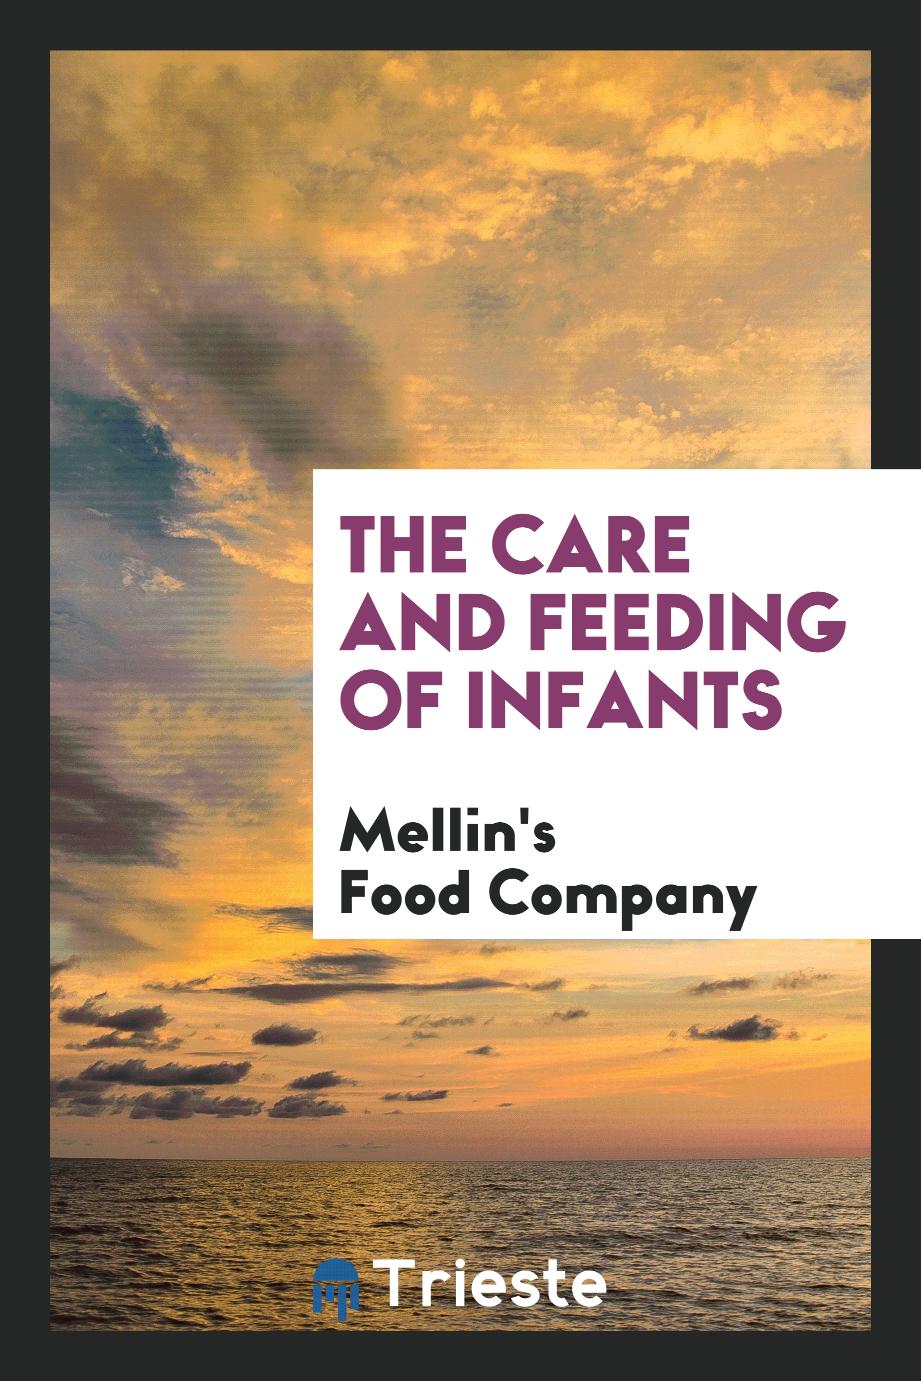 The care and feeding of infants